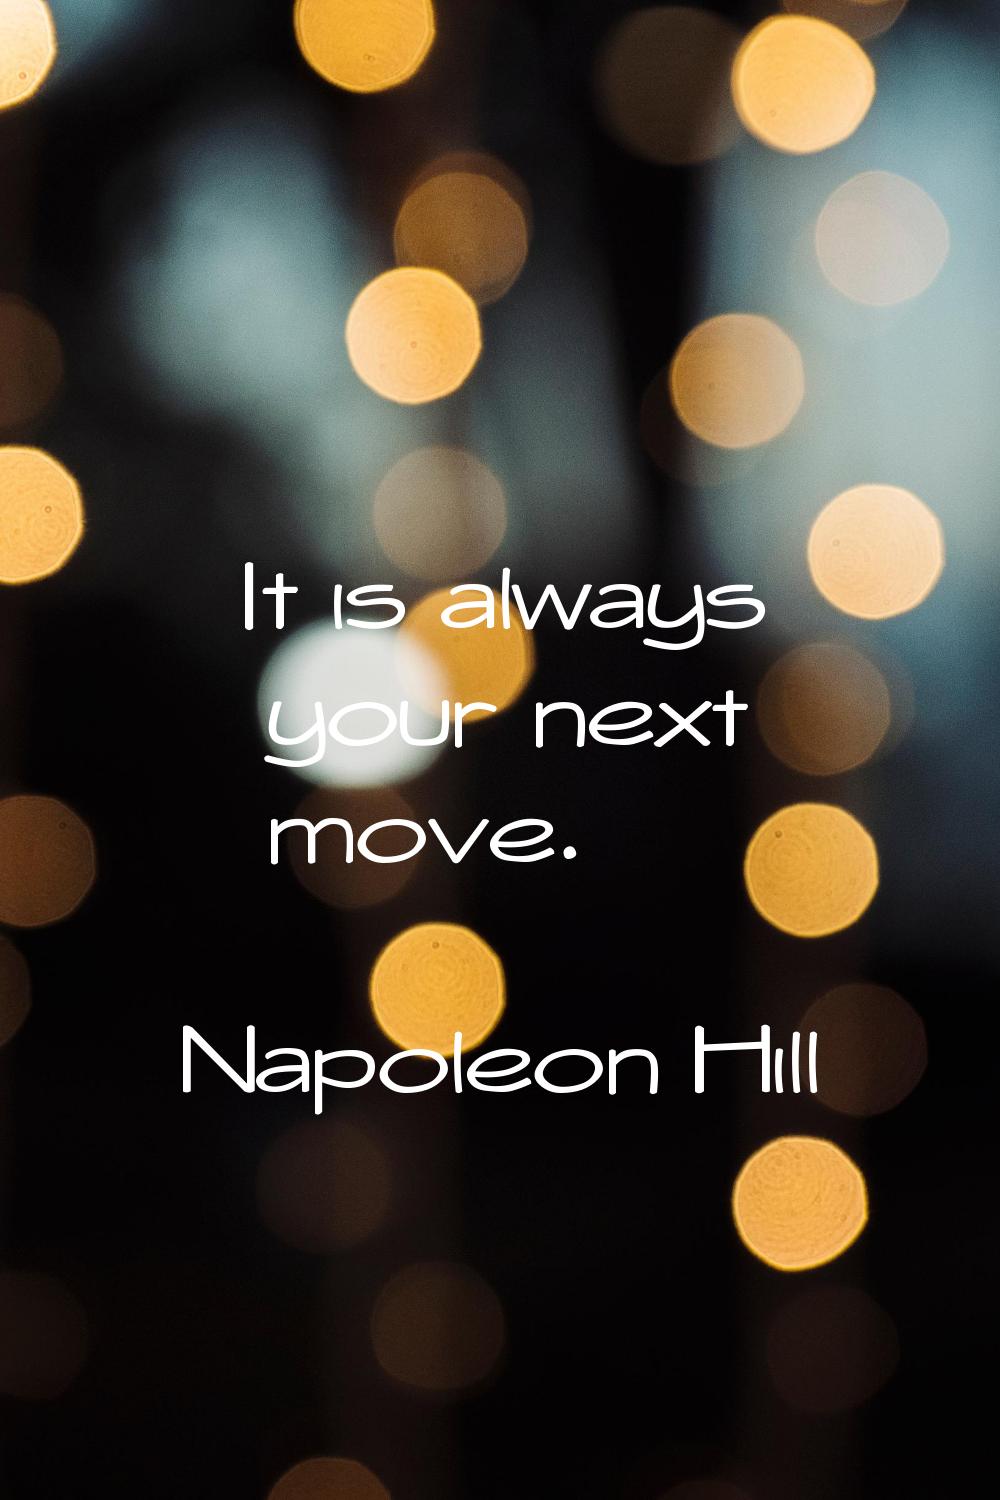 It is always your next move.